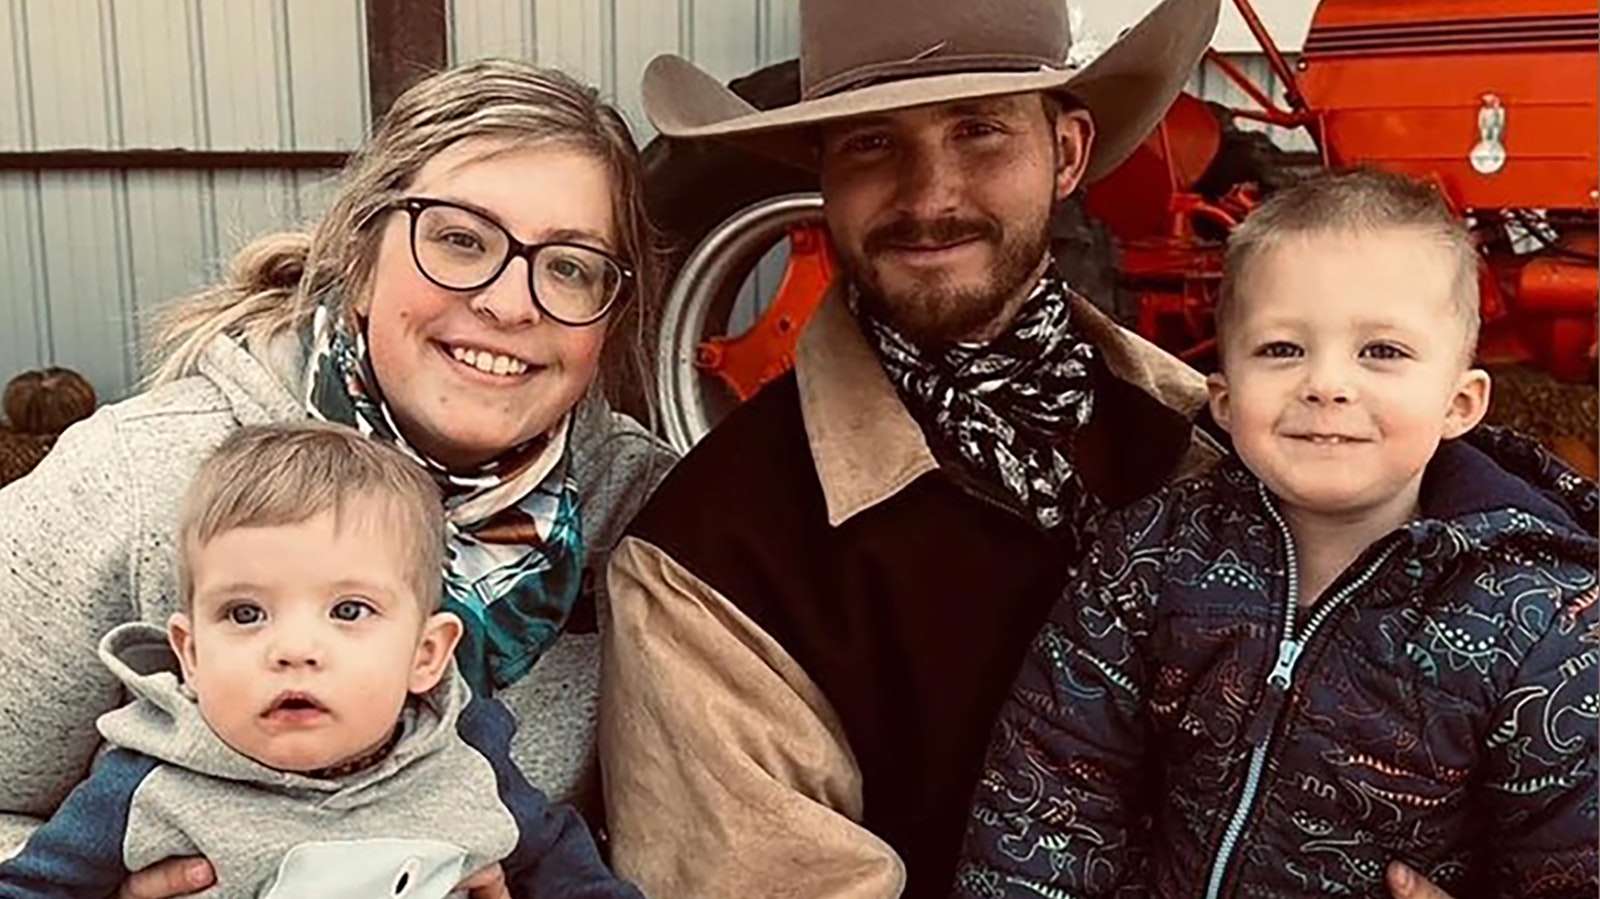 Katelyn and Austin Clymer, and their two young children, are new to Wyoming and were surprised by the response from their neighbors during a recent weather emergency.